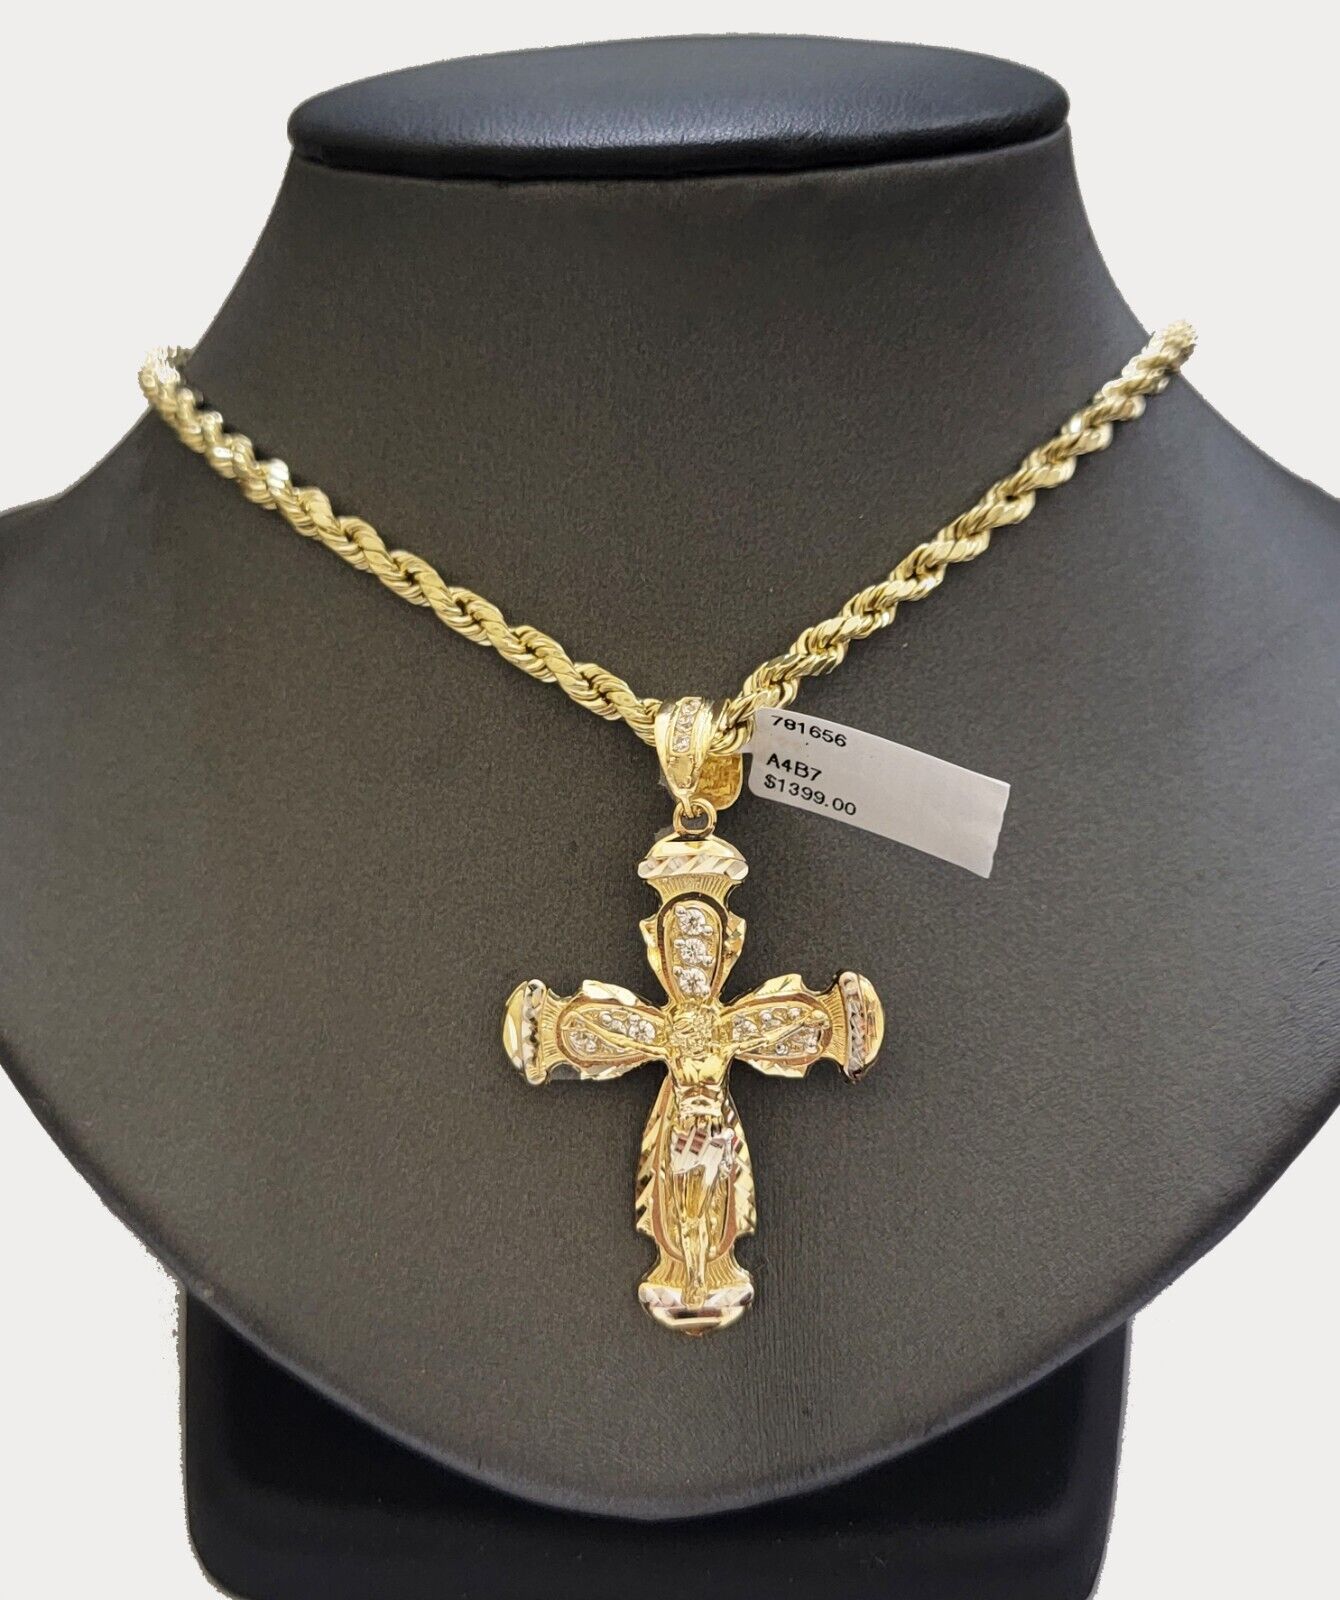 14k Gold Rope Chain Necklace Jesus Cross Charm Pendant CZ Set 18-26inch 5mm  REAL